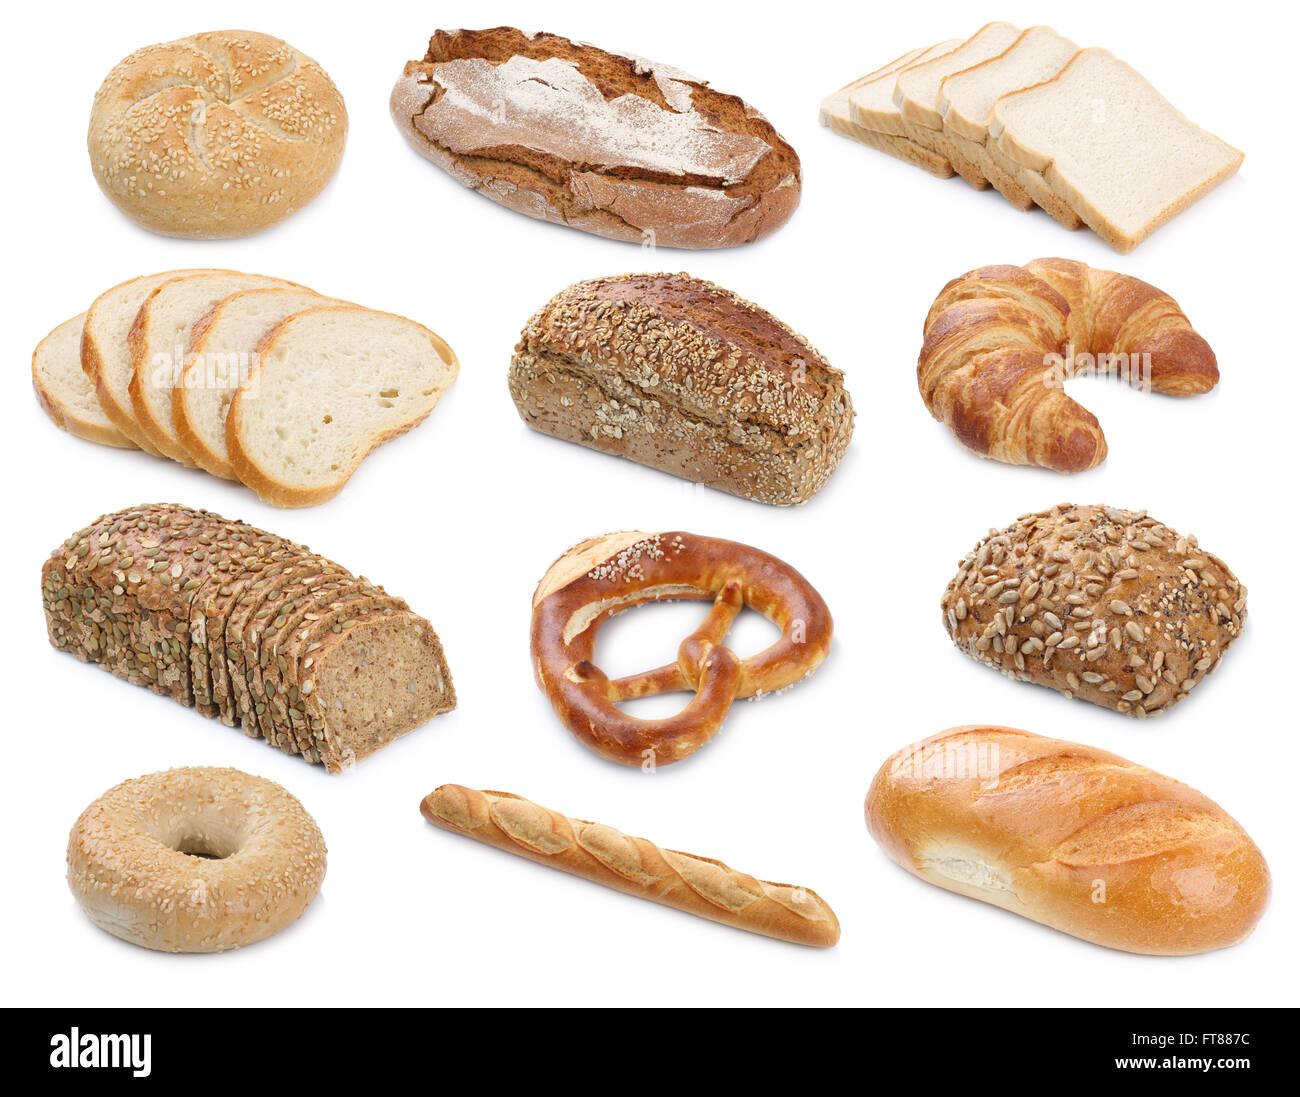 Collection of bread breads bagel roll toast baguette pretzel isolated on a white background bakery Stock Photo